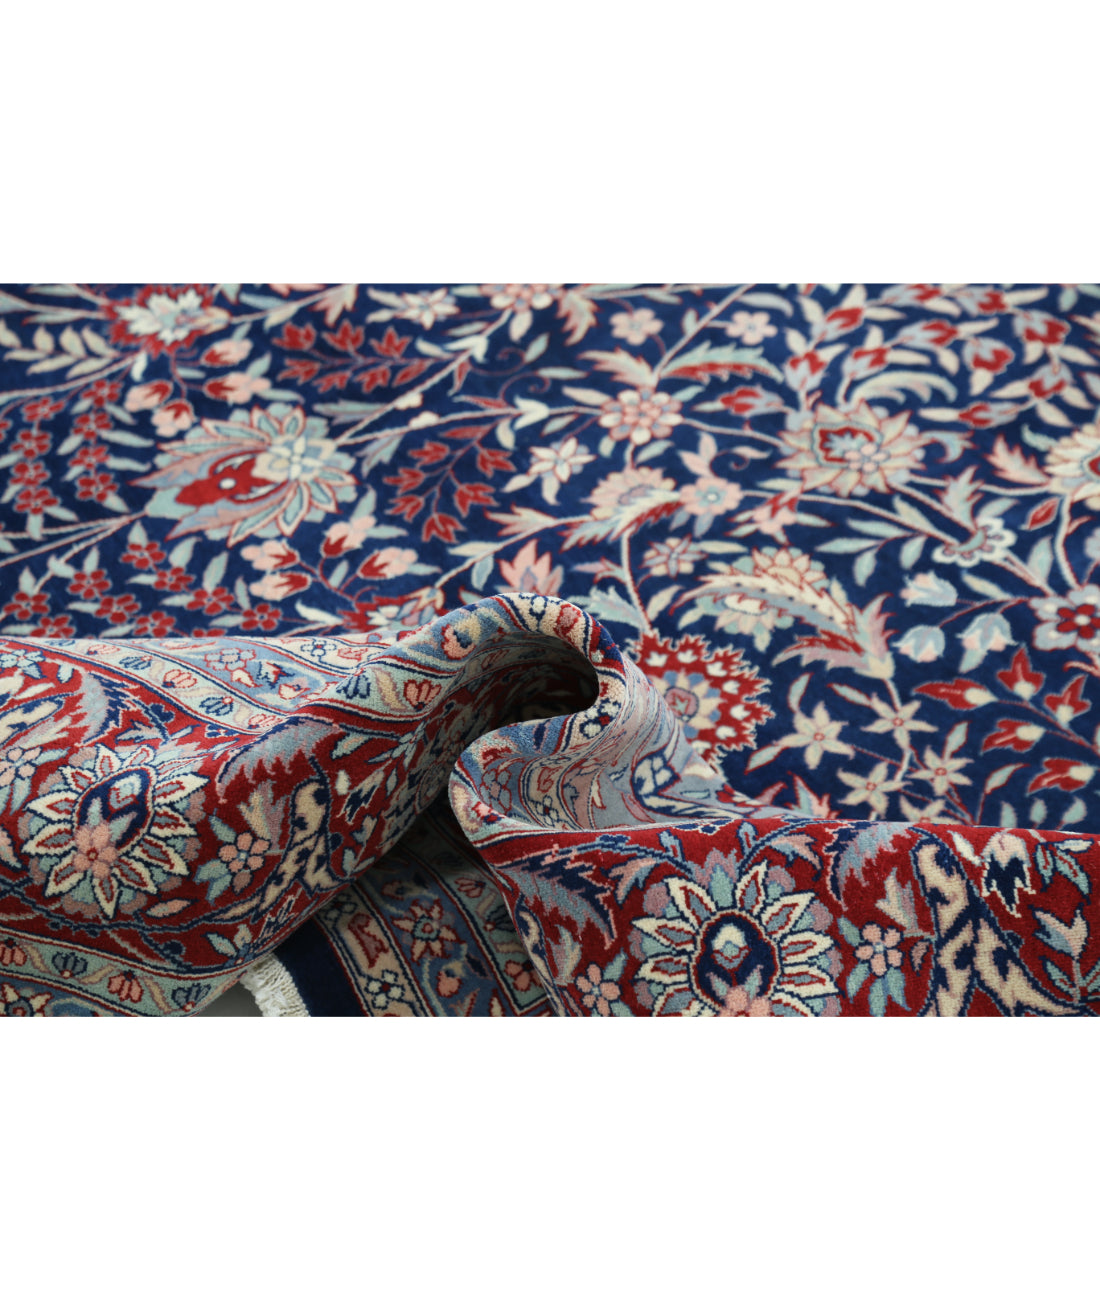 Hand Knotted Heritage Fine Persian Style Wool Rug - 9'9'' x 13'10'' 9' 9" X 13' 10" (297 X 422) / Blue / Red